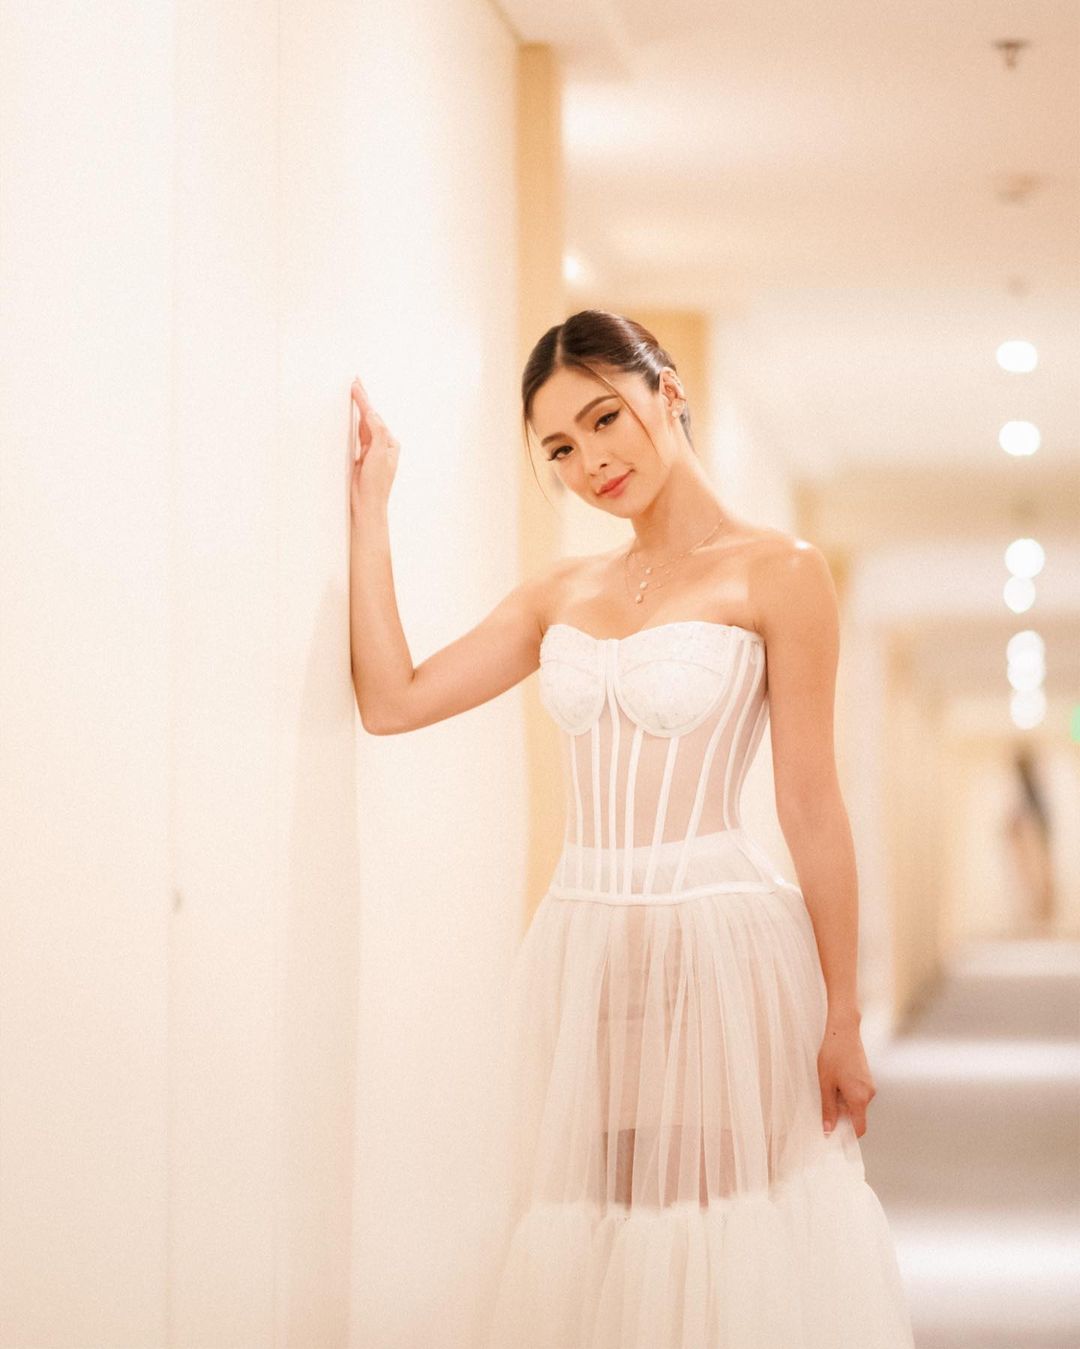 Sharing a sneak peek into the daily OOTD journey of actress Kim Chiu o